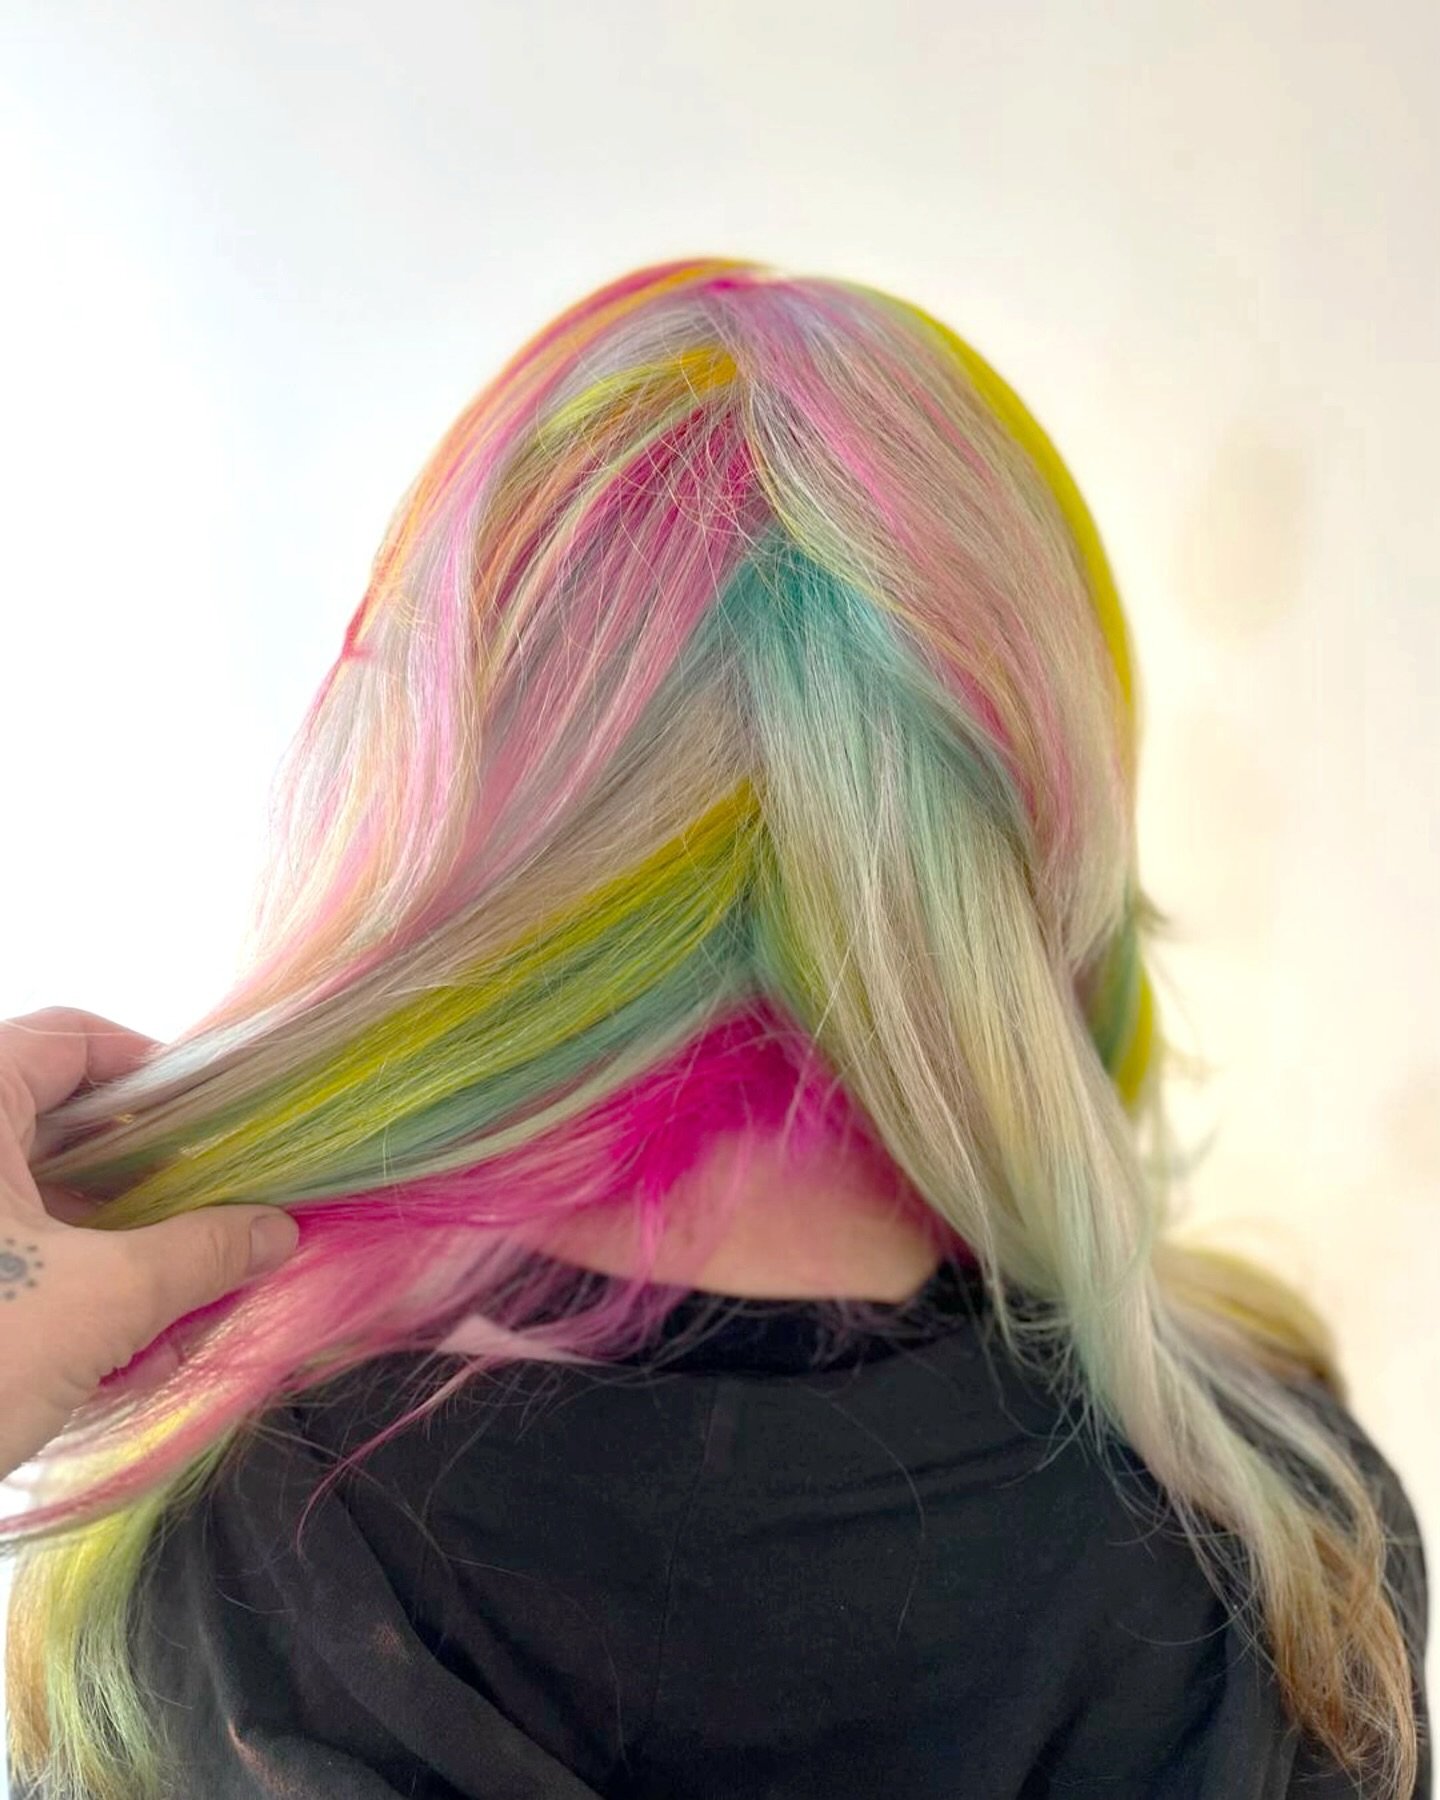 Whether you&rsquo;re chasing a subtle splash or a full-on color explosion, we&rsquo;ve got your hues covered. What&rsquo;s going to be your color story this spring? 

Hair by @running.with_scissors 

#spokanesalon #spokanehair